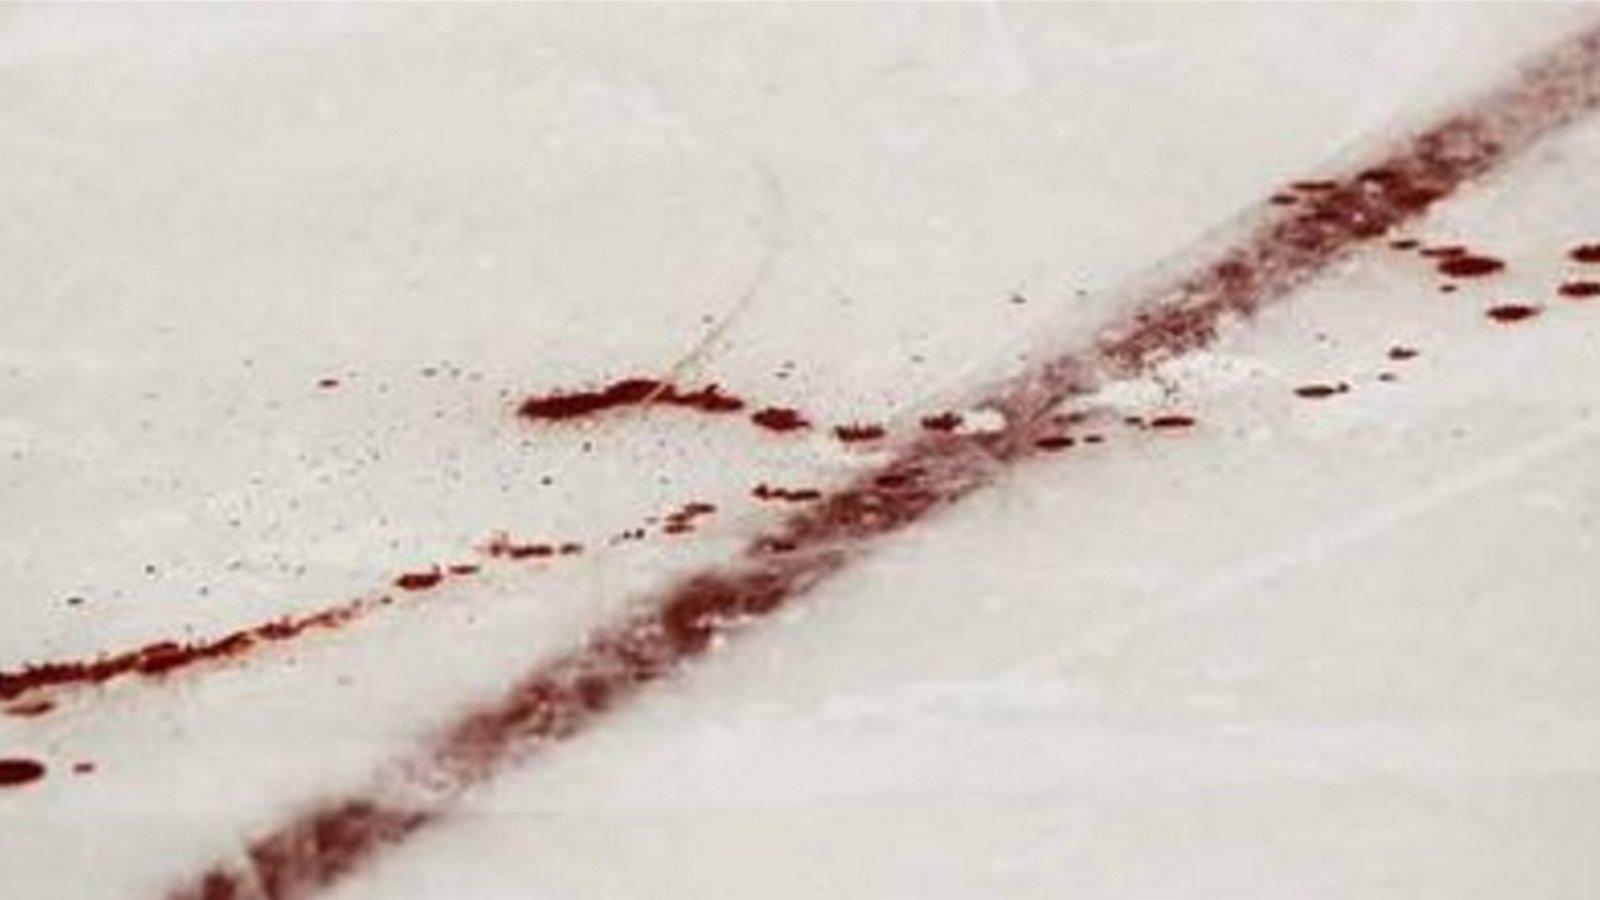 NHLer takes a puck to the face, leaves the ice a bloody mess. 